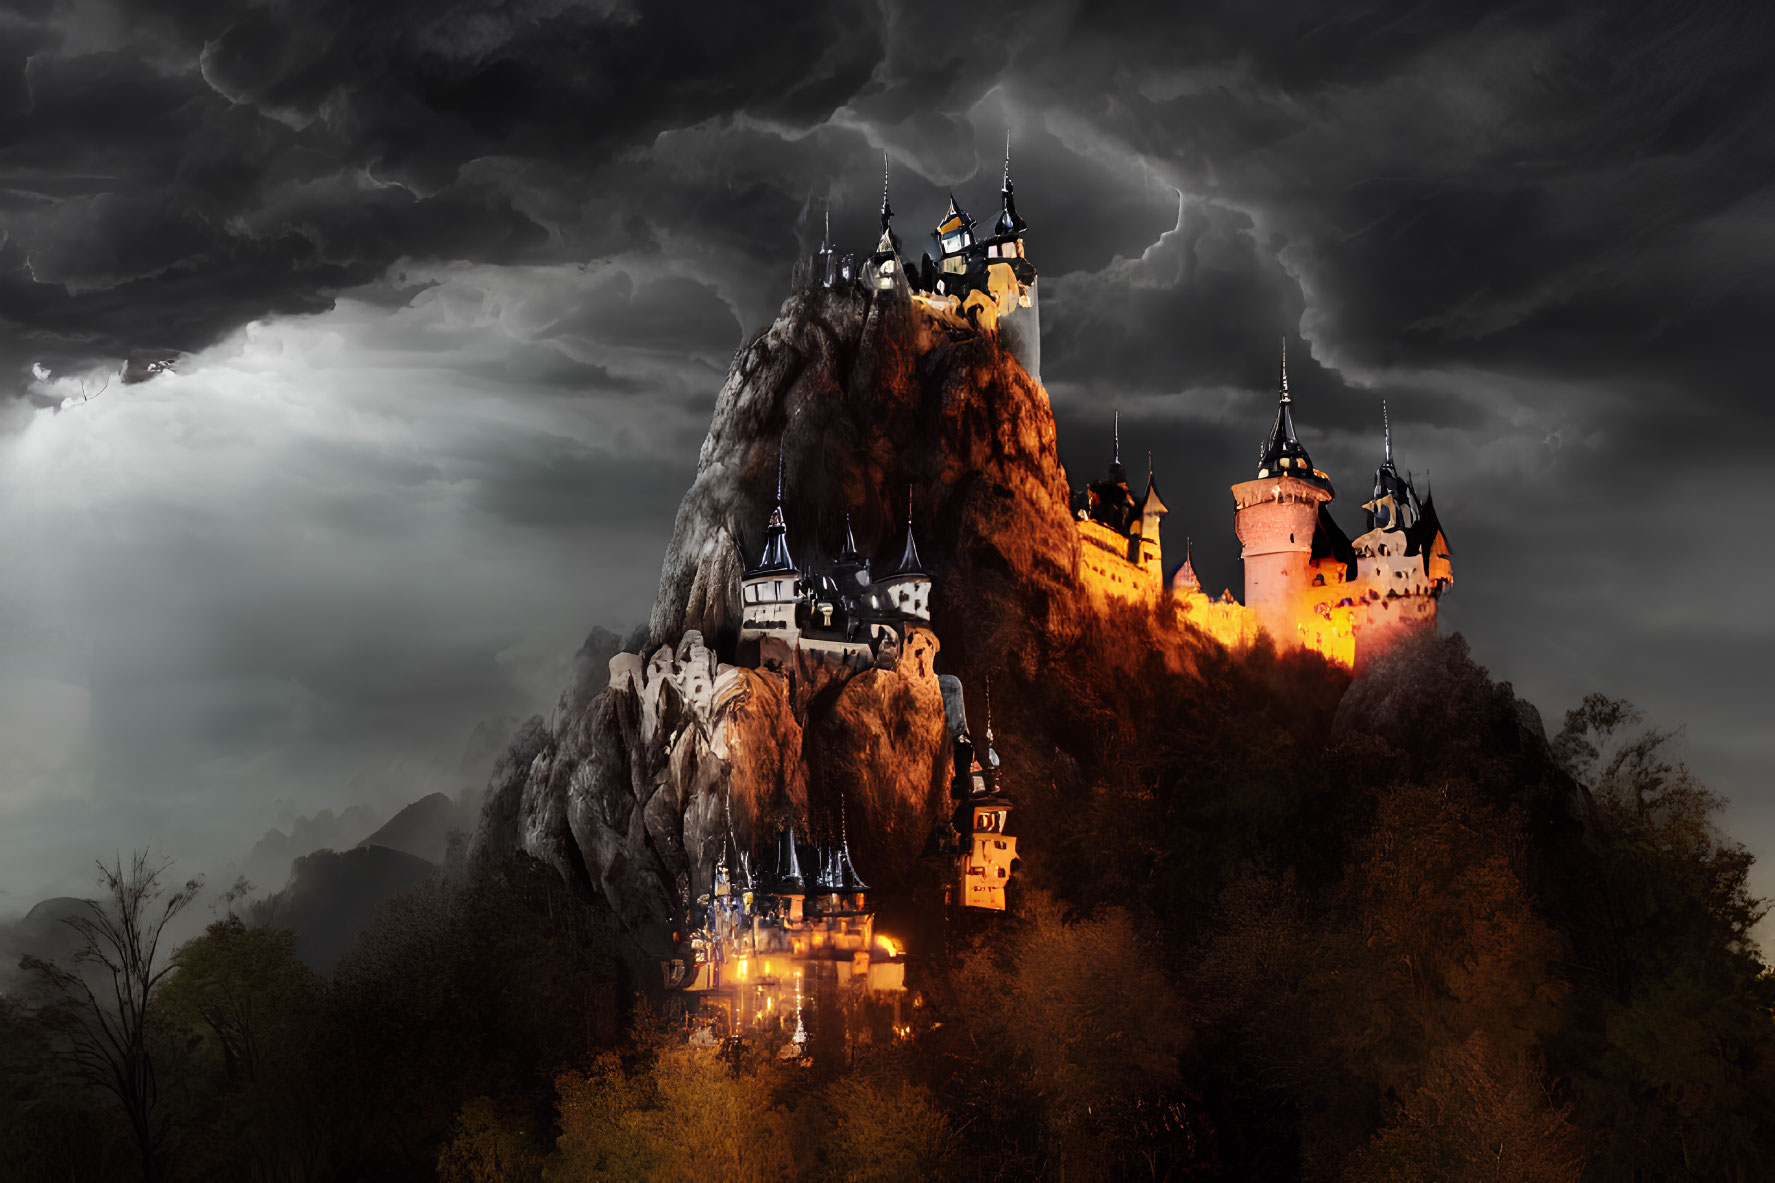 Grand castle on rugged cliff illuminated by warm lights against stormy sky